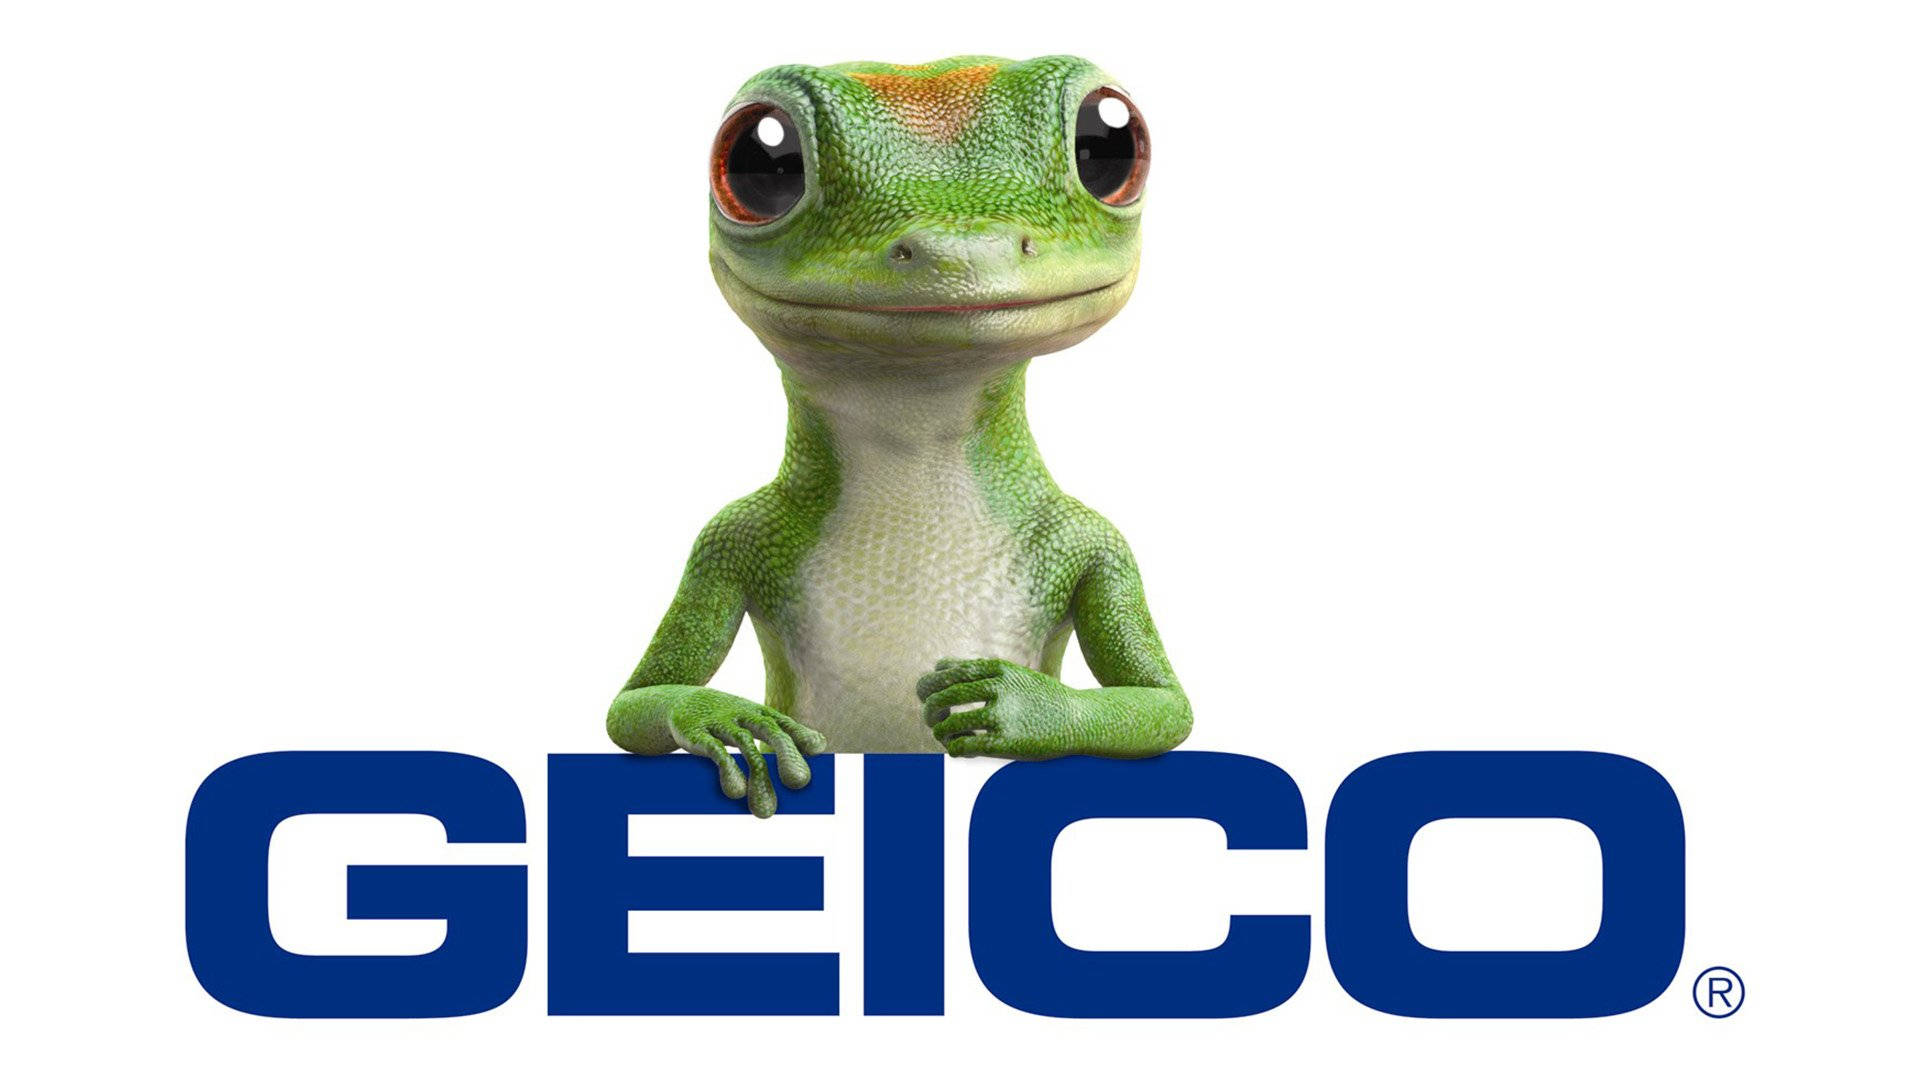 Charming Geico Poster Wallpaper